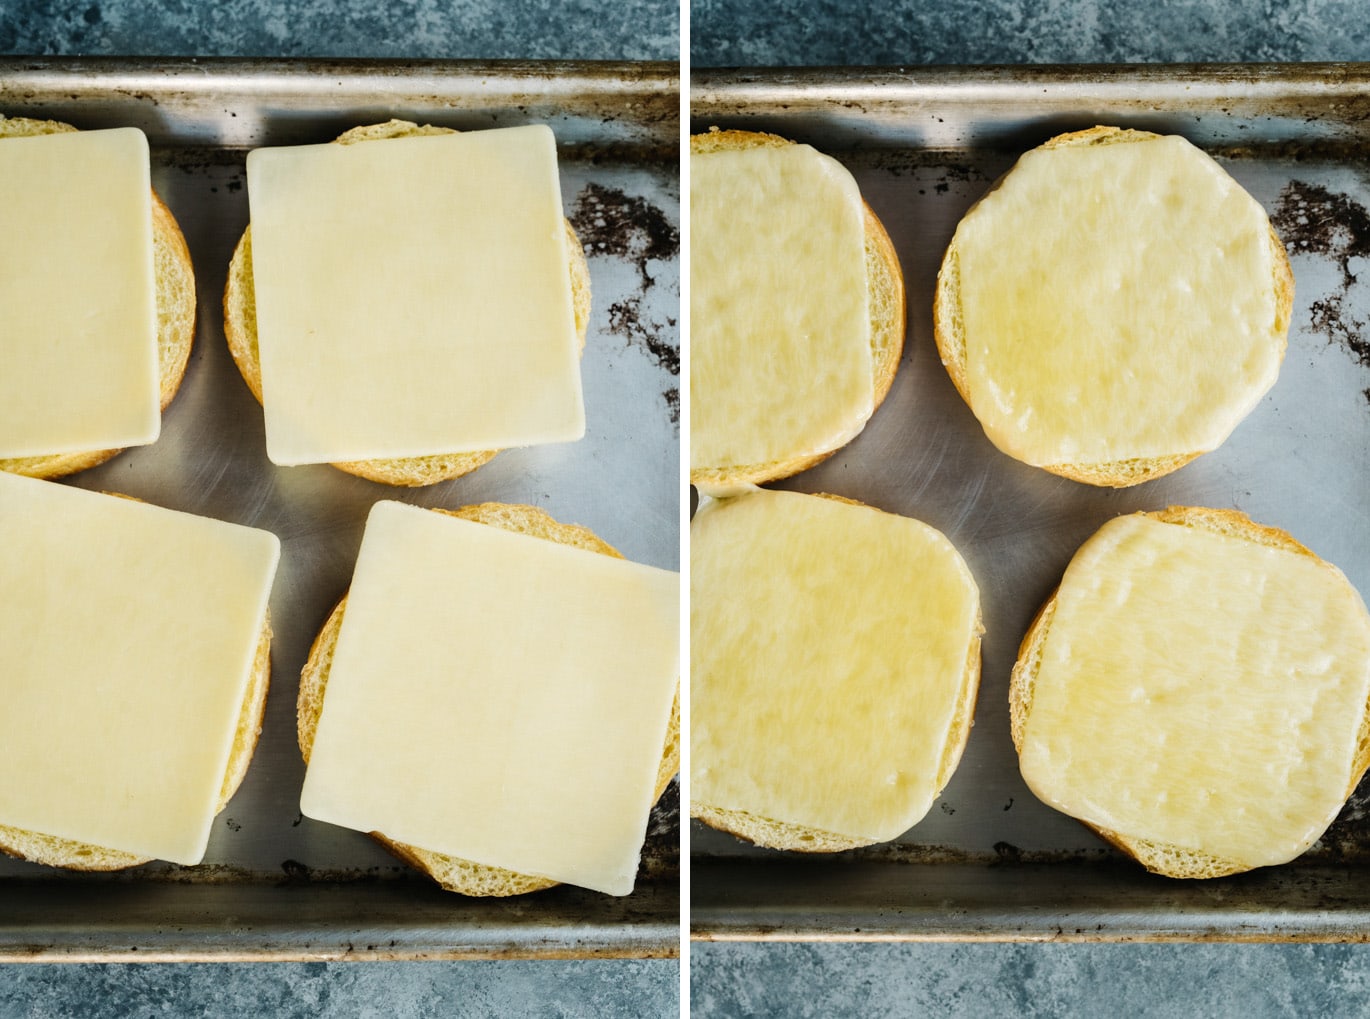 A slice of sharp cheddar over a brioche bun before and after being broiled.